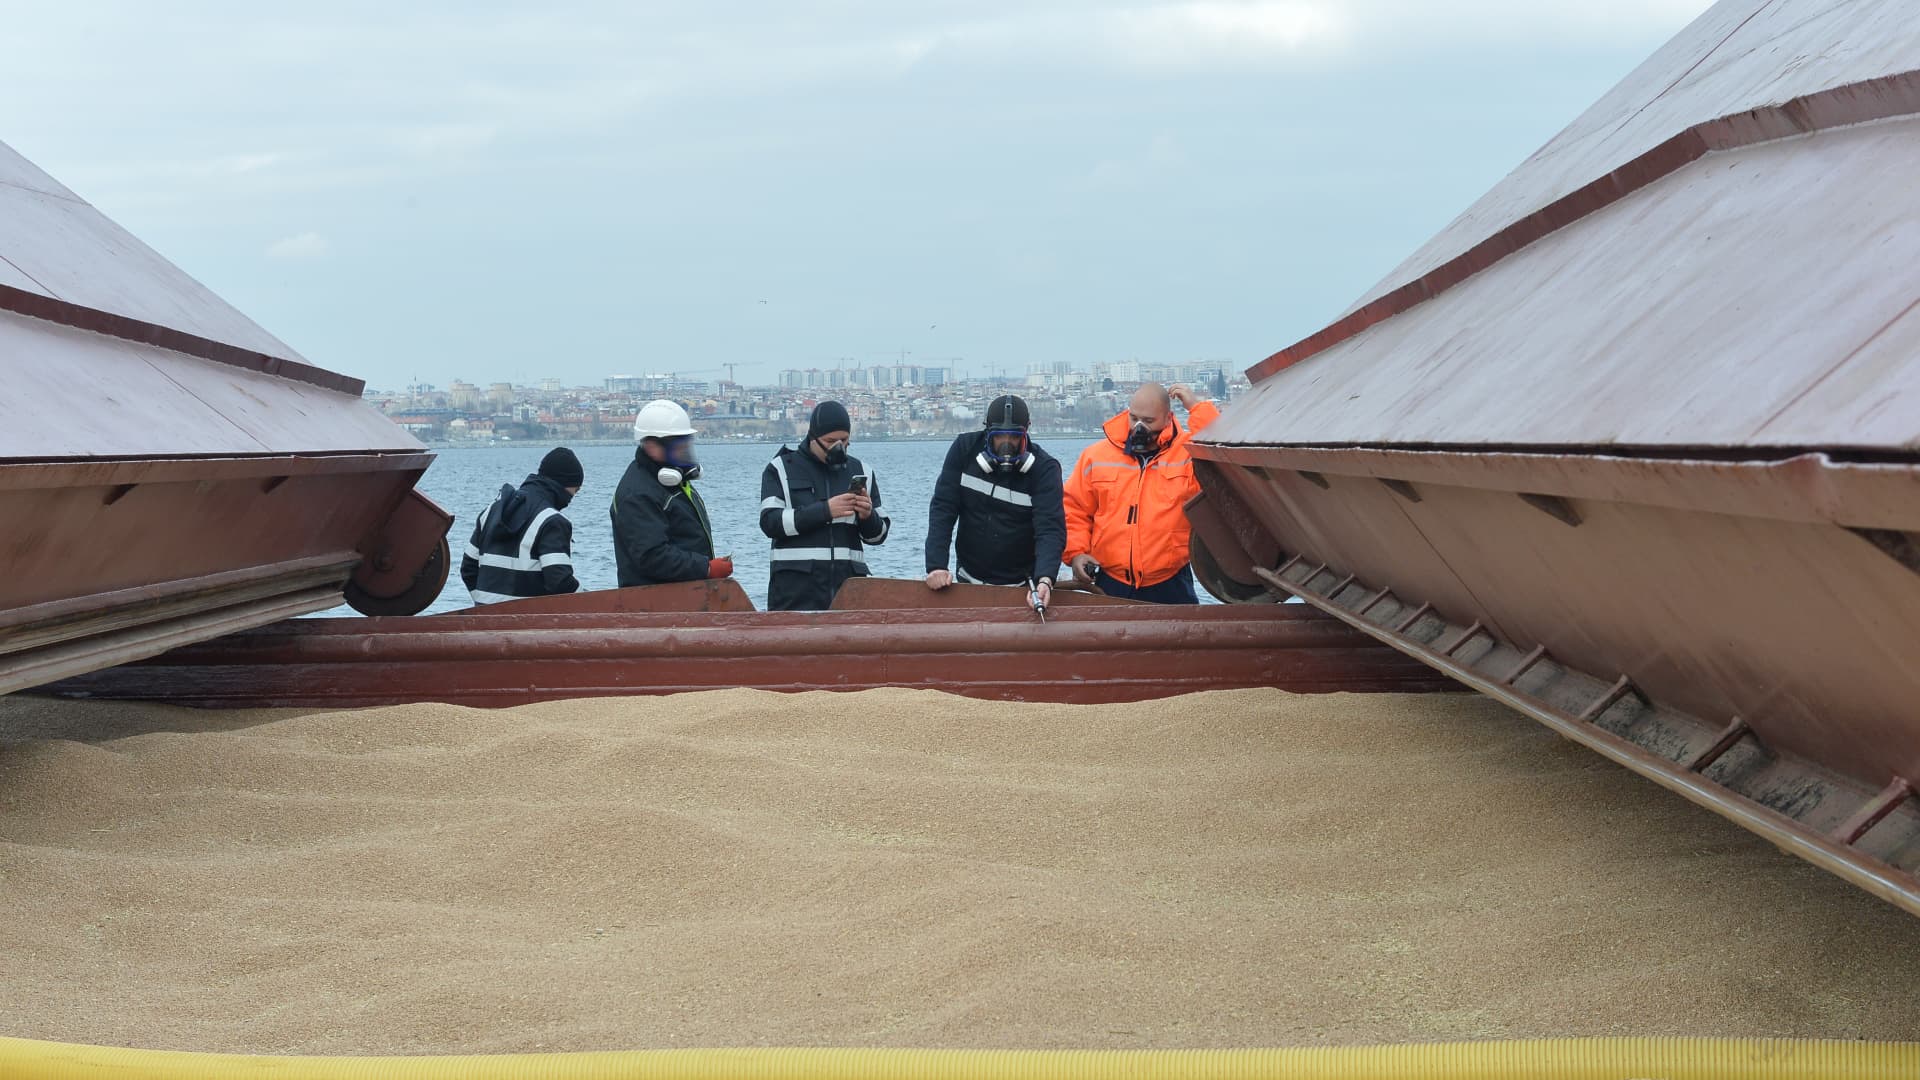 A team inspects the produce in the ship carrying wheat from Ukraine to Afghanistan after inspection in the open sea around Zeytinburnu district of Istanbul, Turkey, on Jan. 24, 2023.